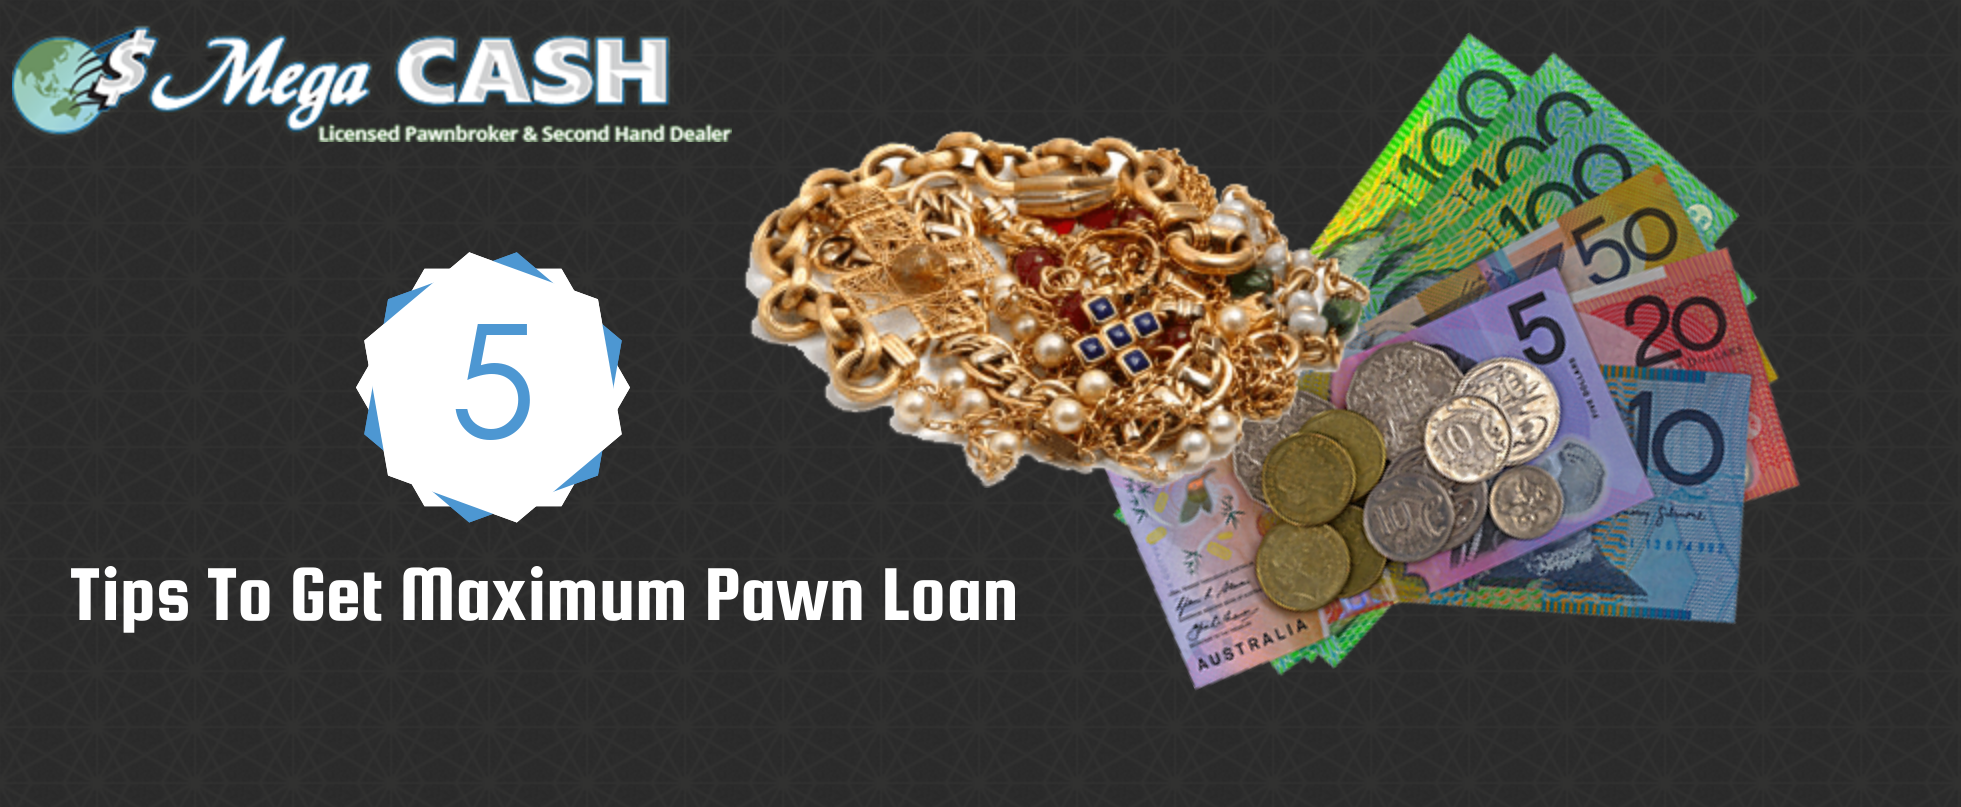 Tips to get maximum pawn loan